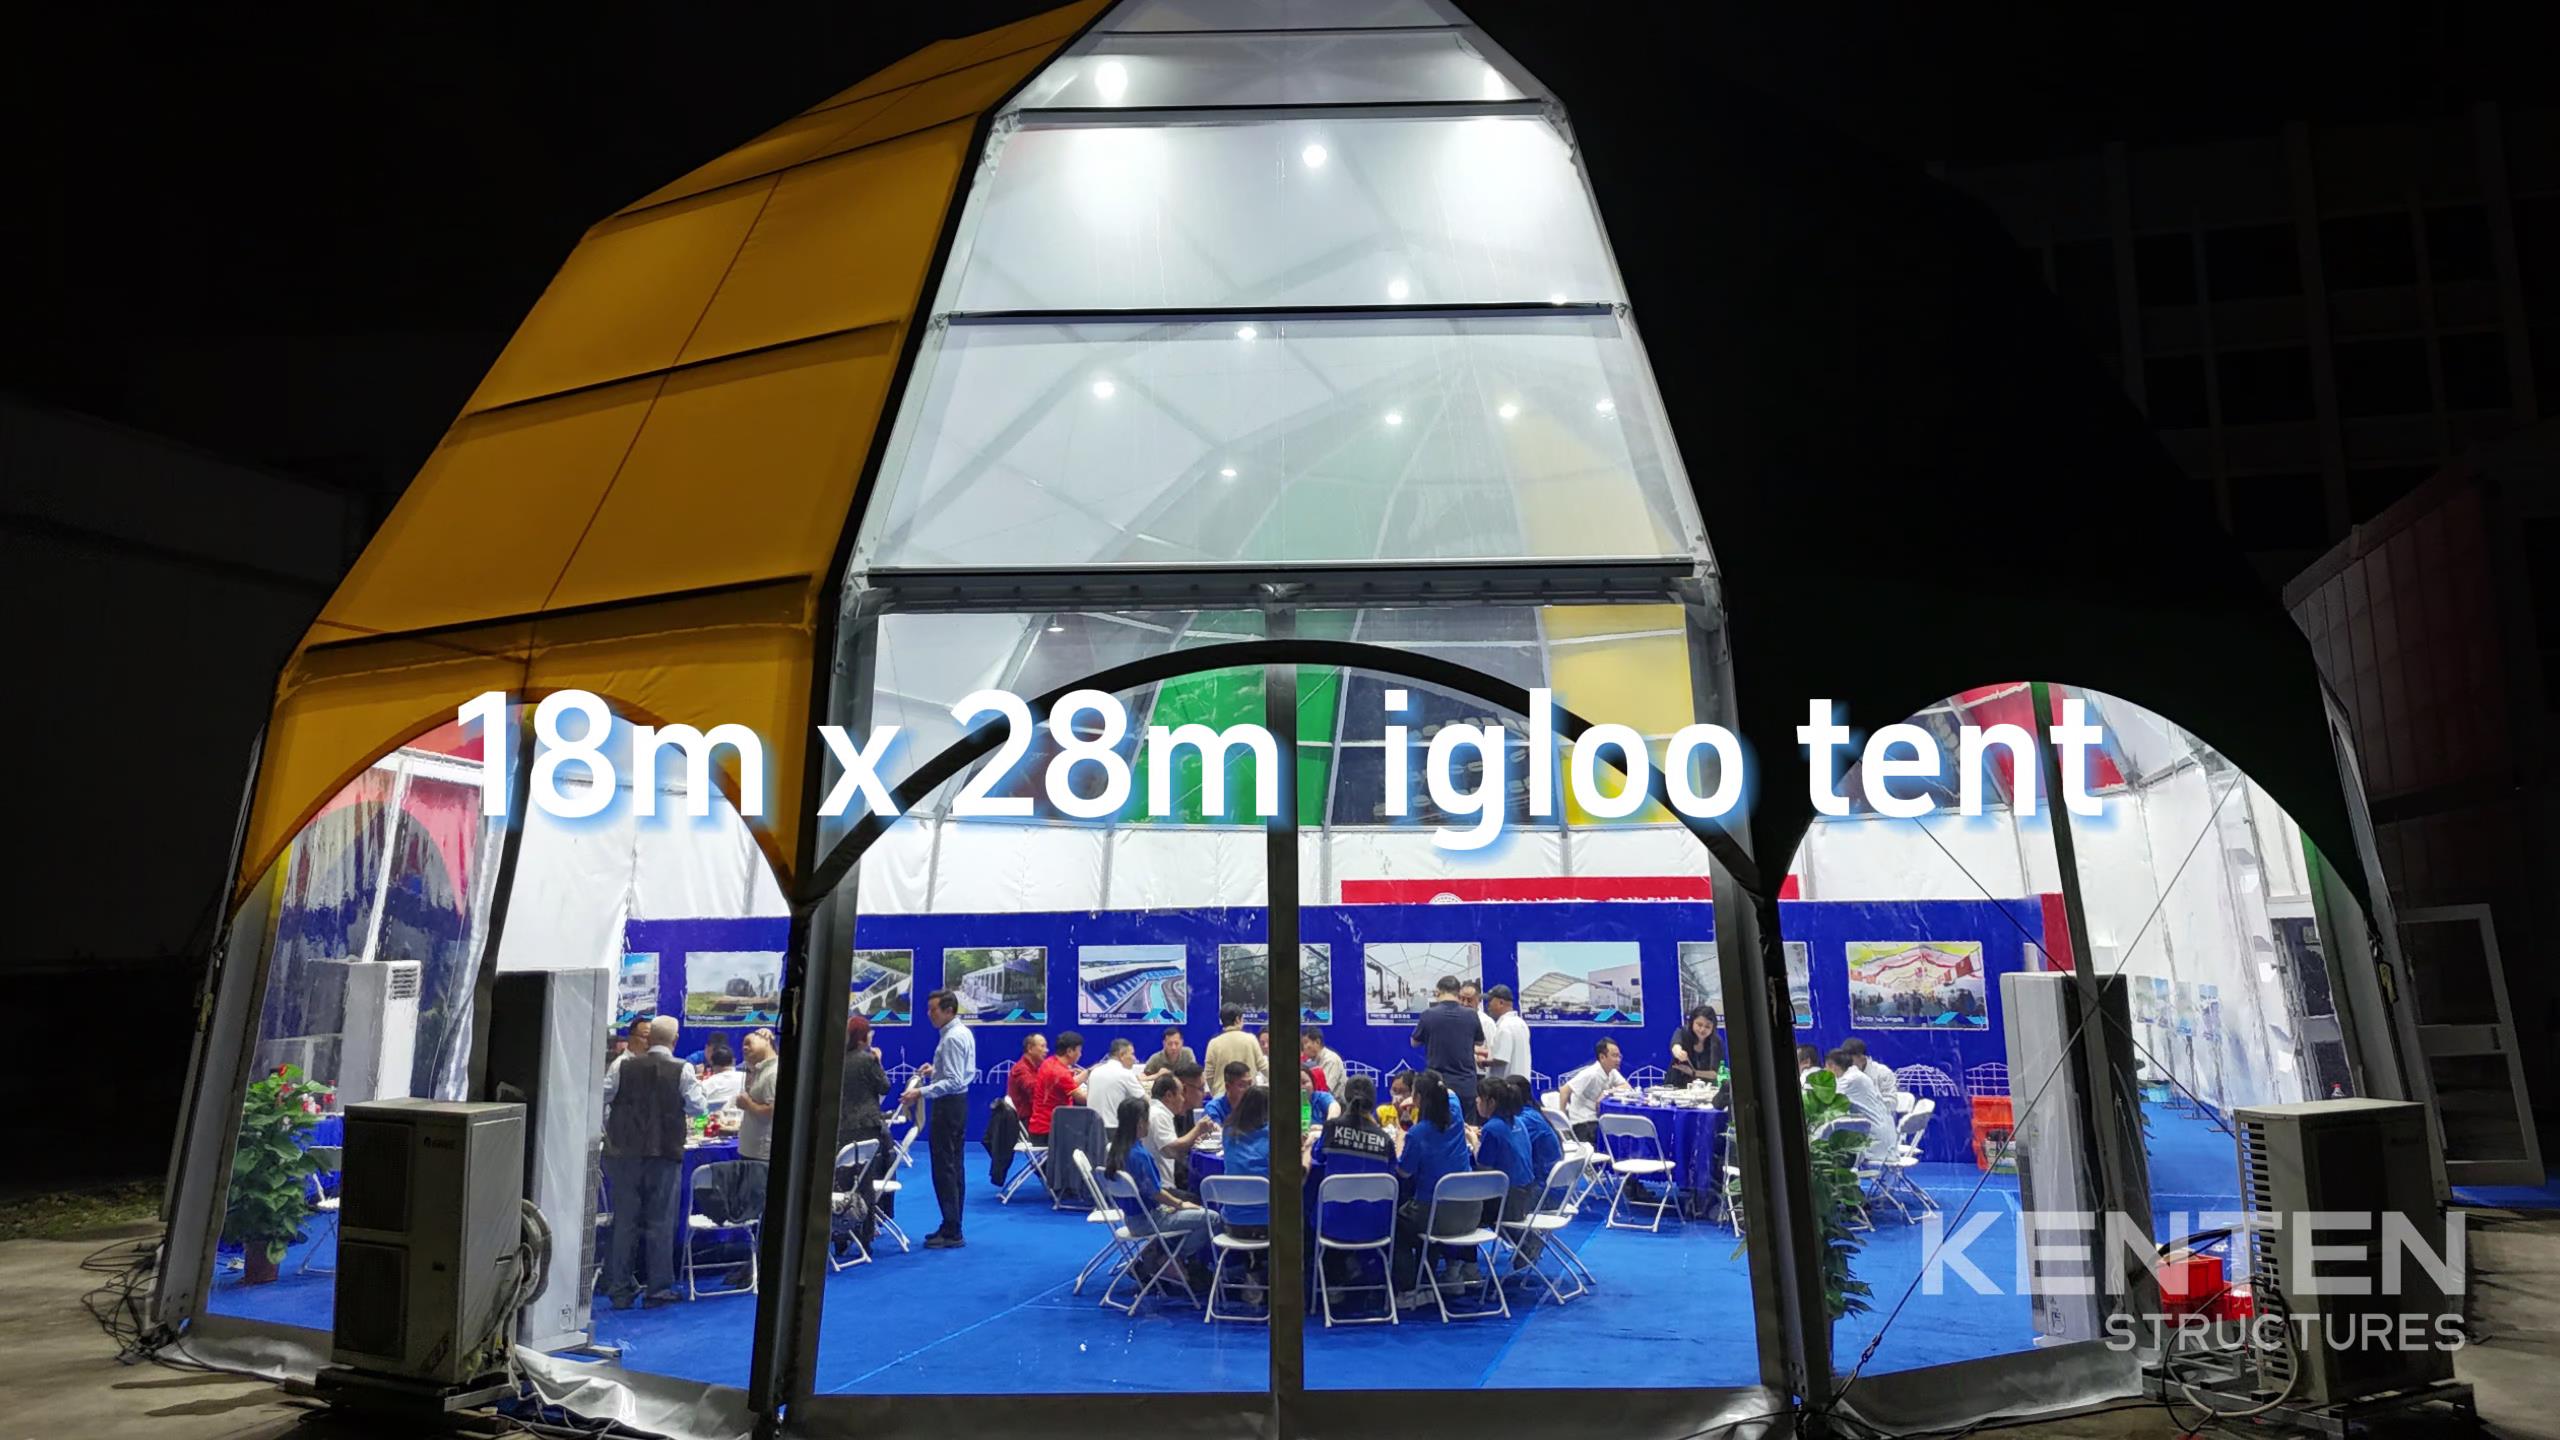 Check out our latest addition to events - the impressive 18m x 28m igloo structure!